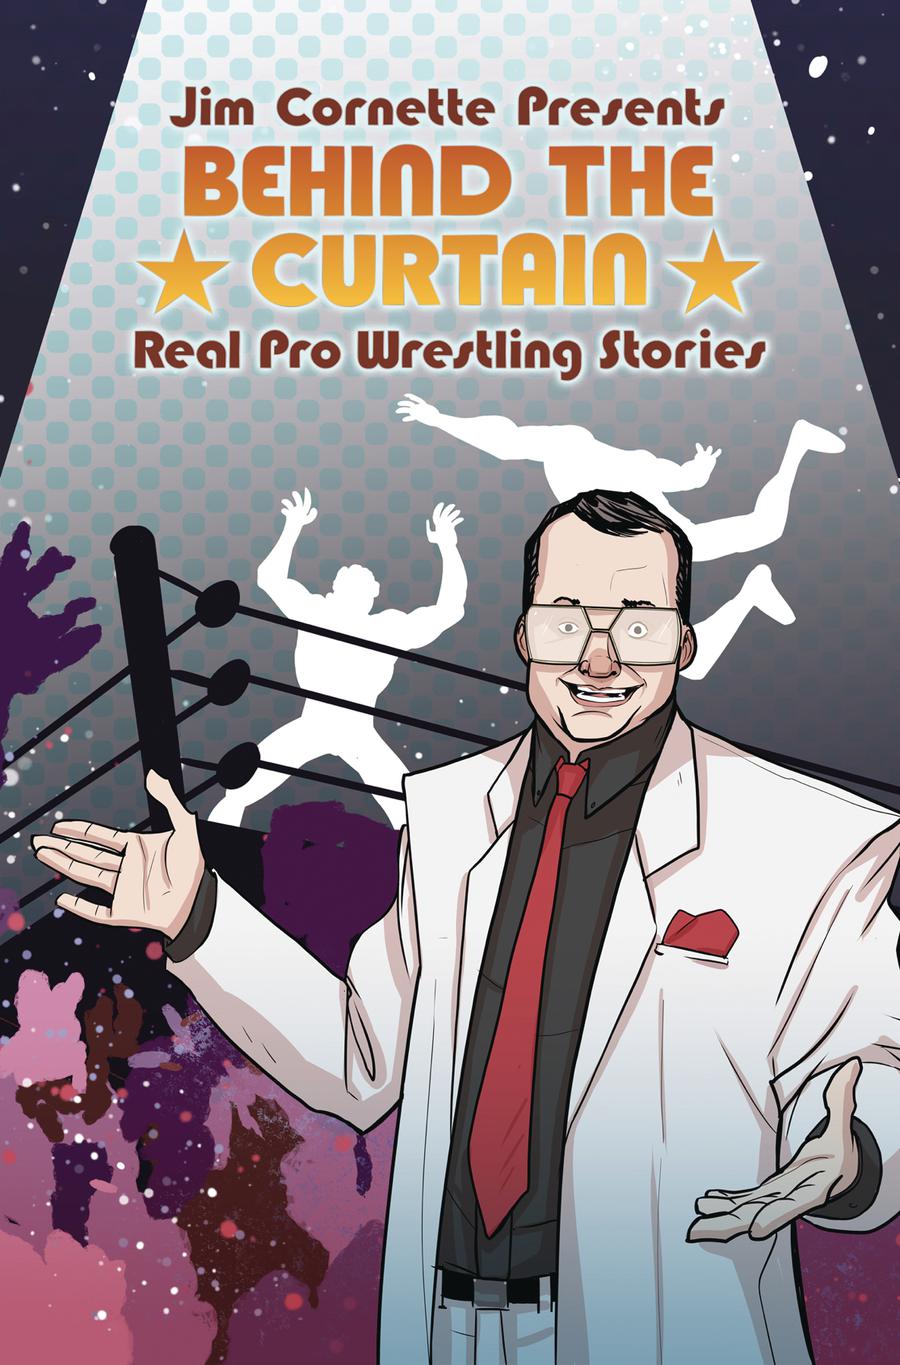 Jim Cornette Presents Behind The Curtain Real Pro Wrestling Stories TP